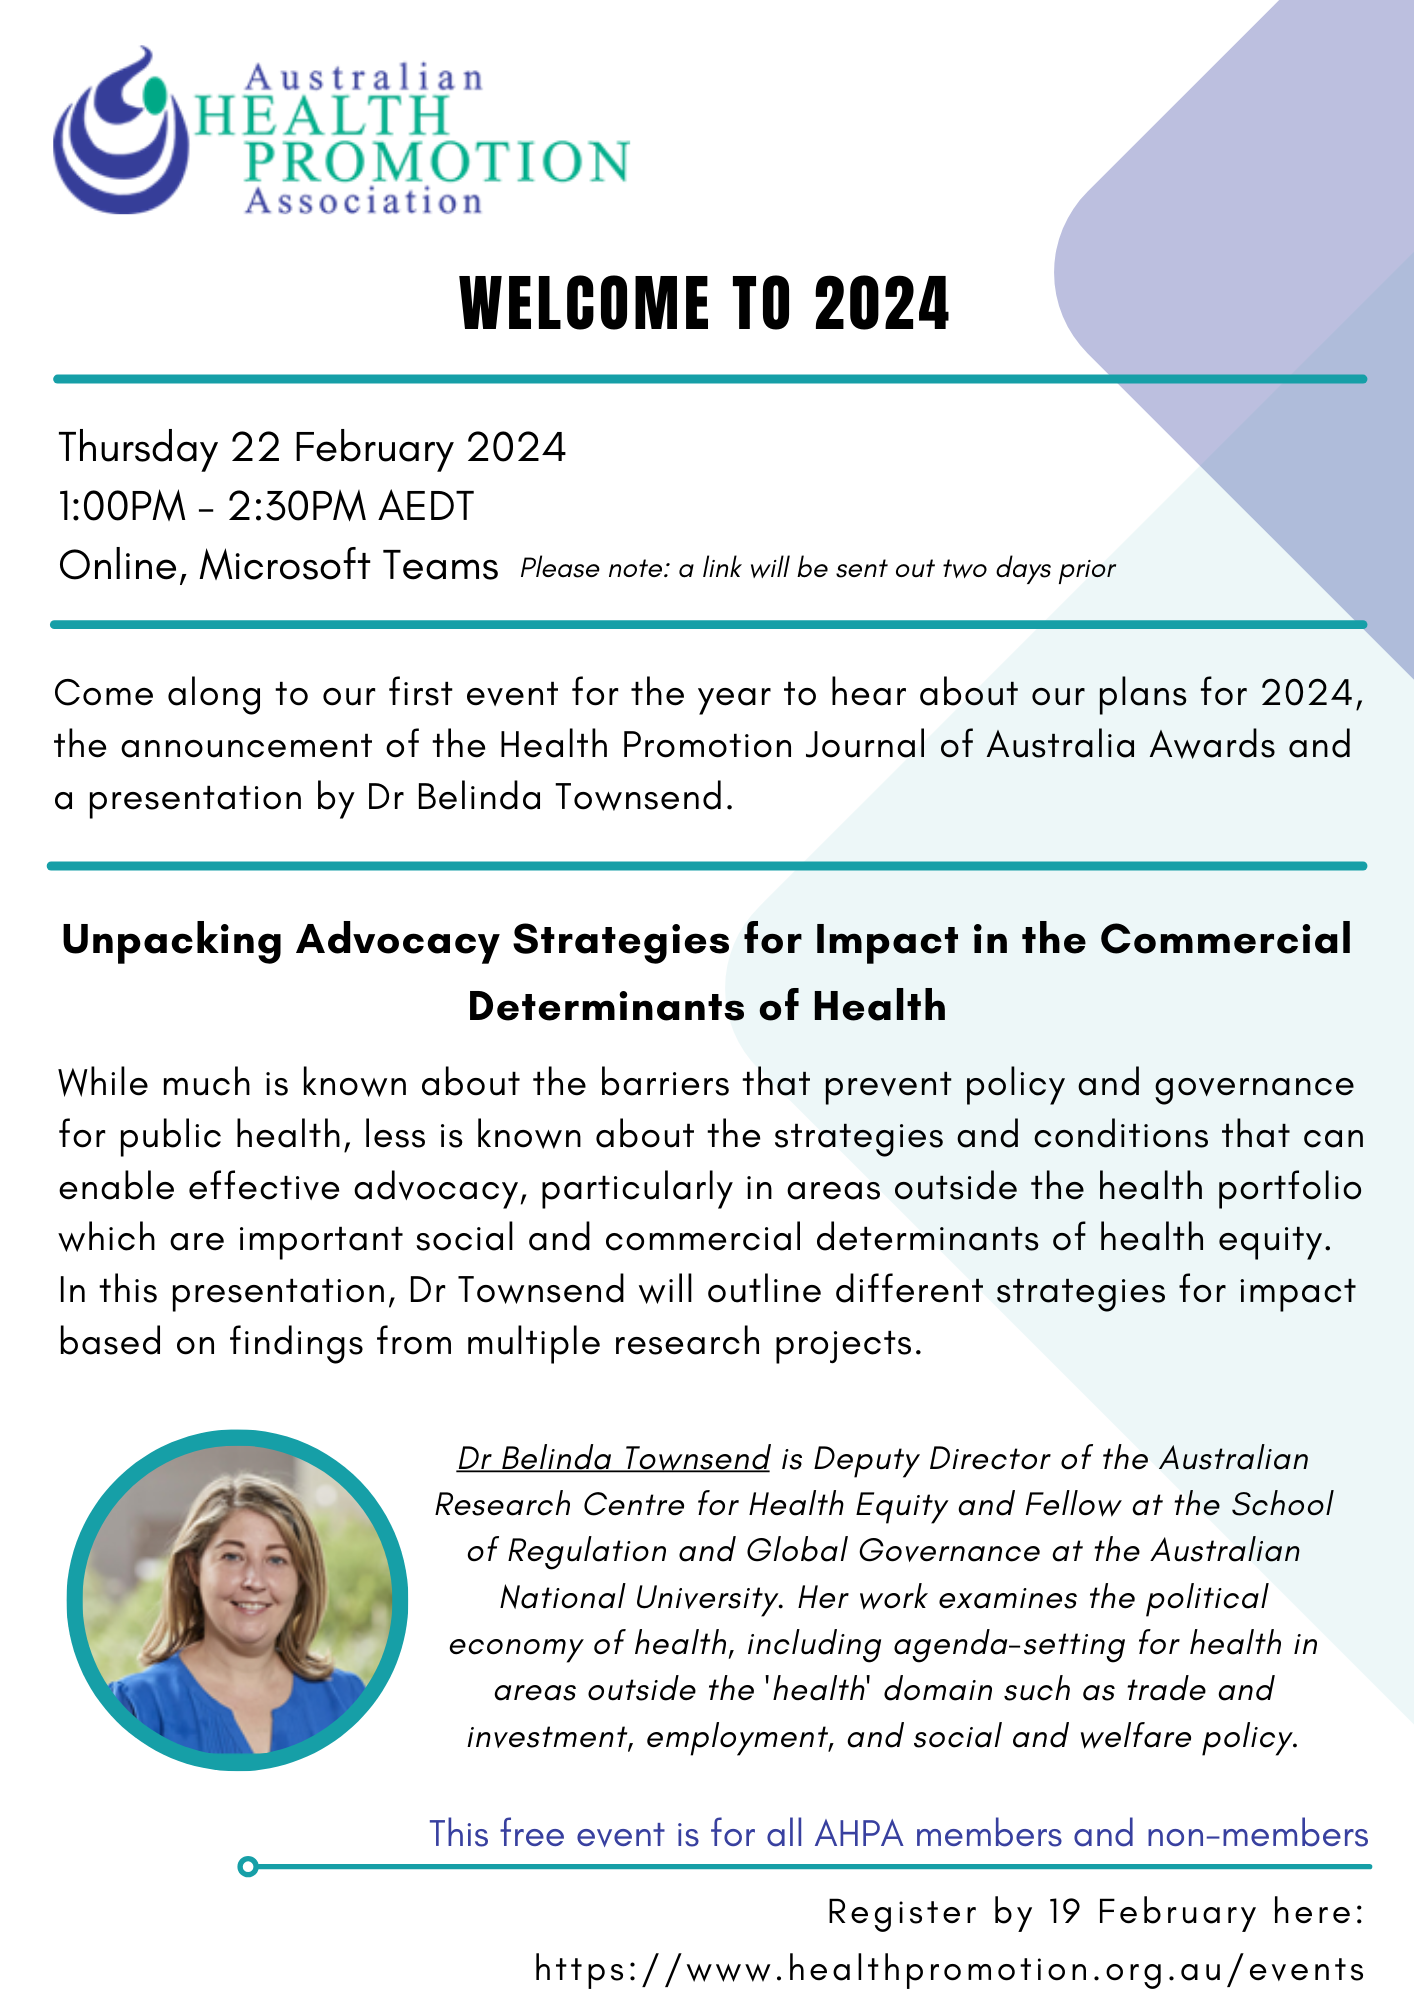 Welcome to 2024 AHPA Event